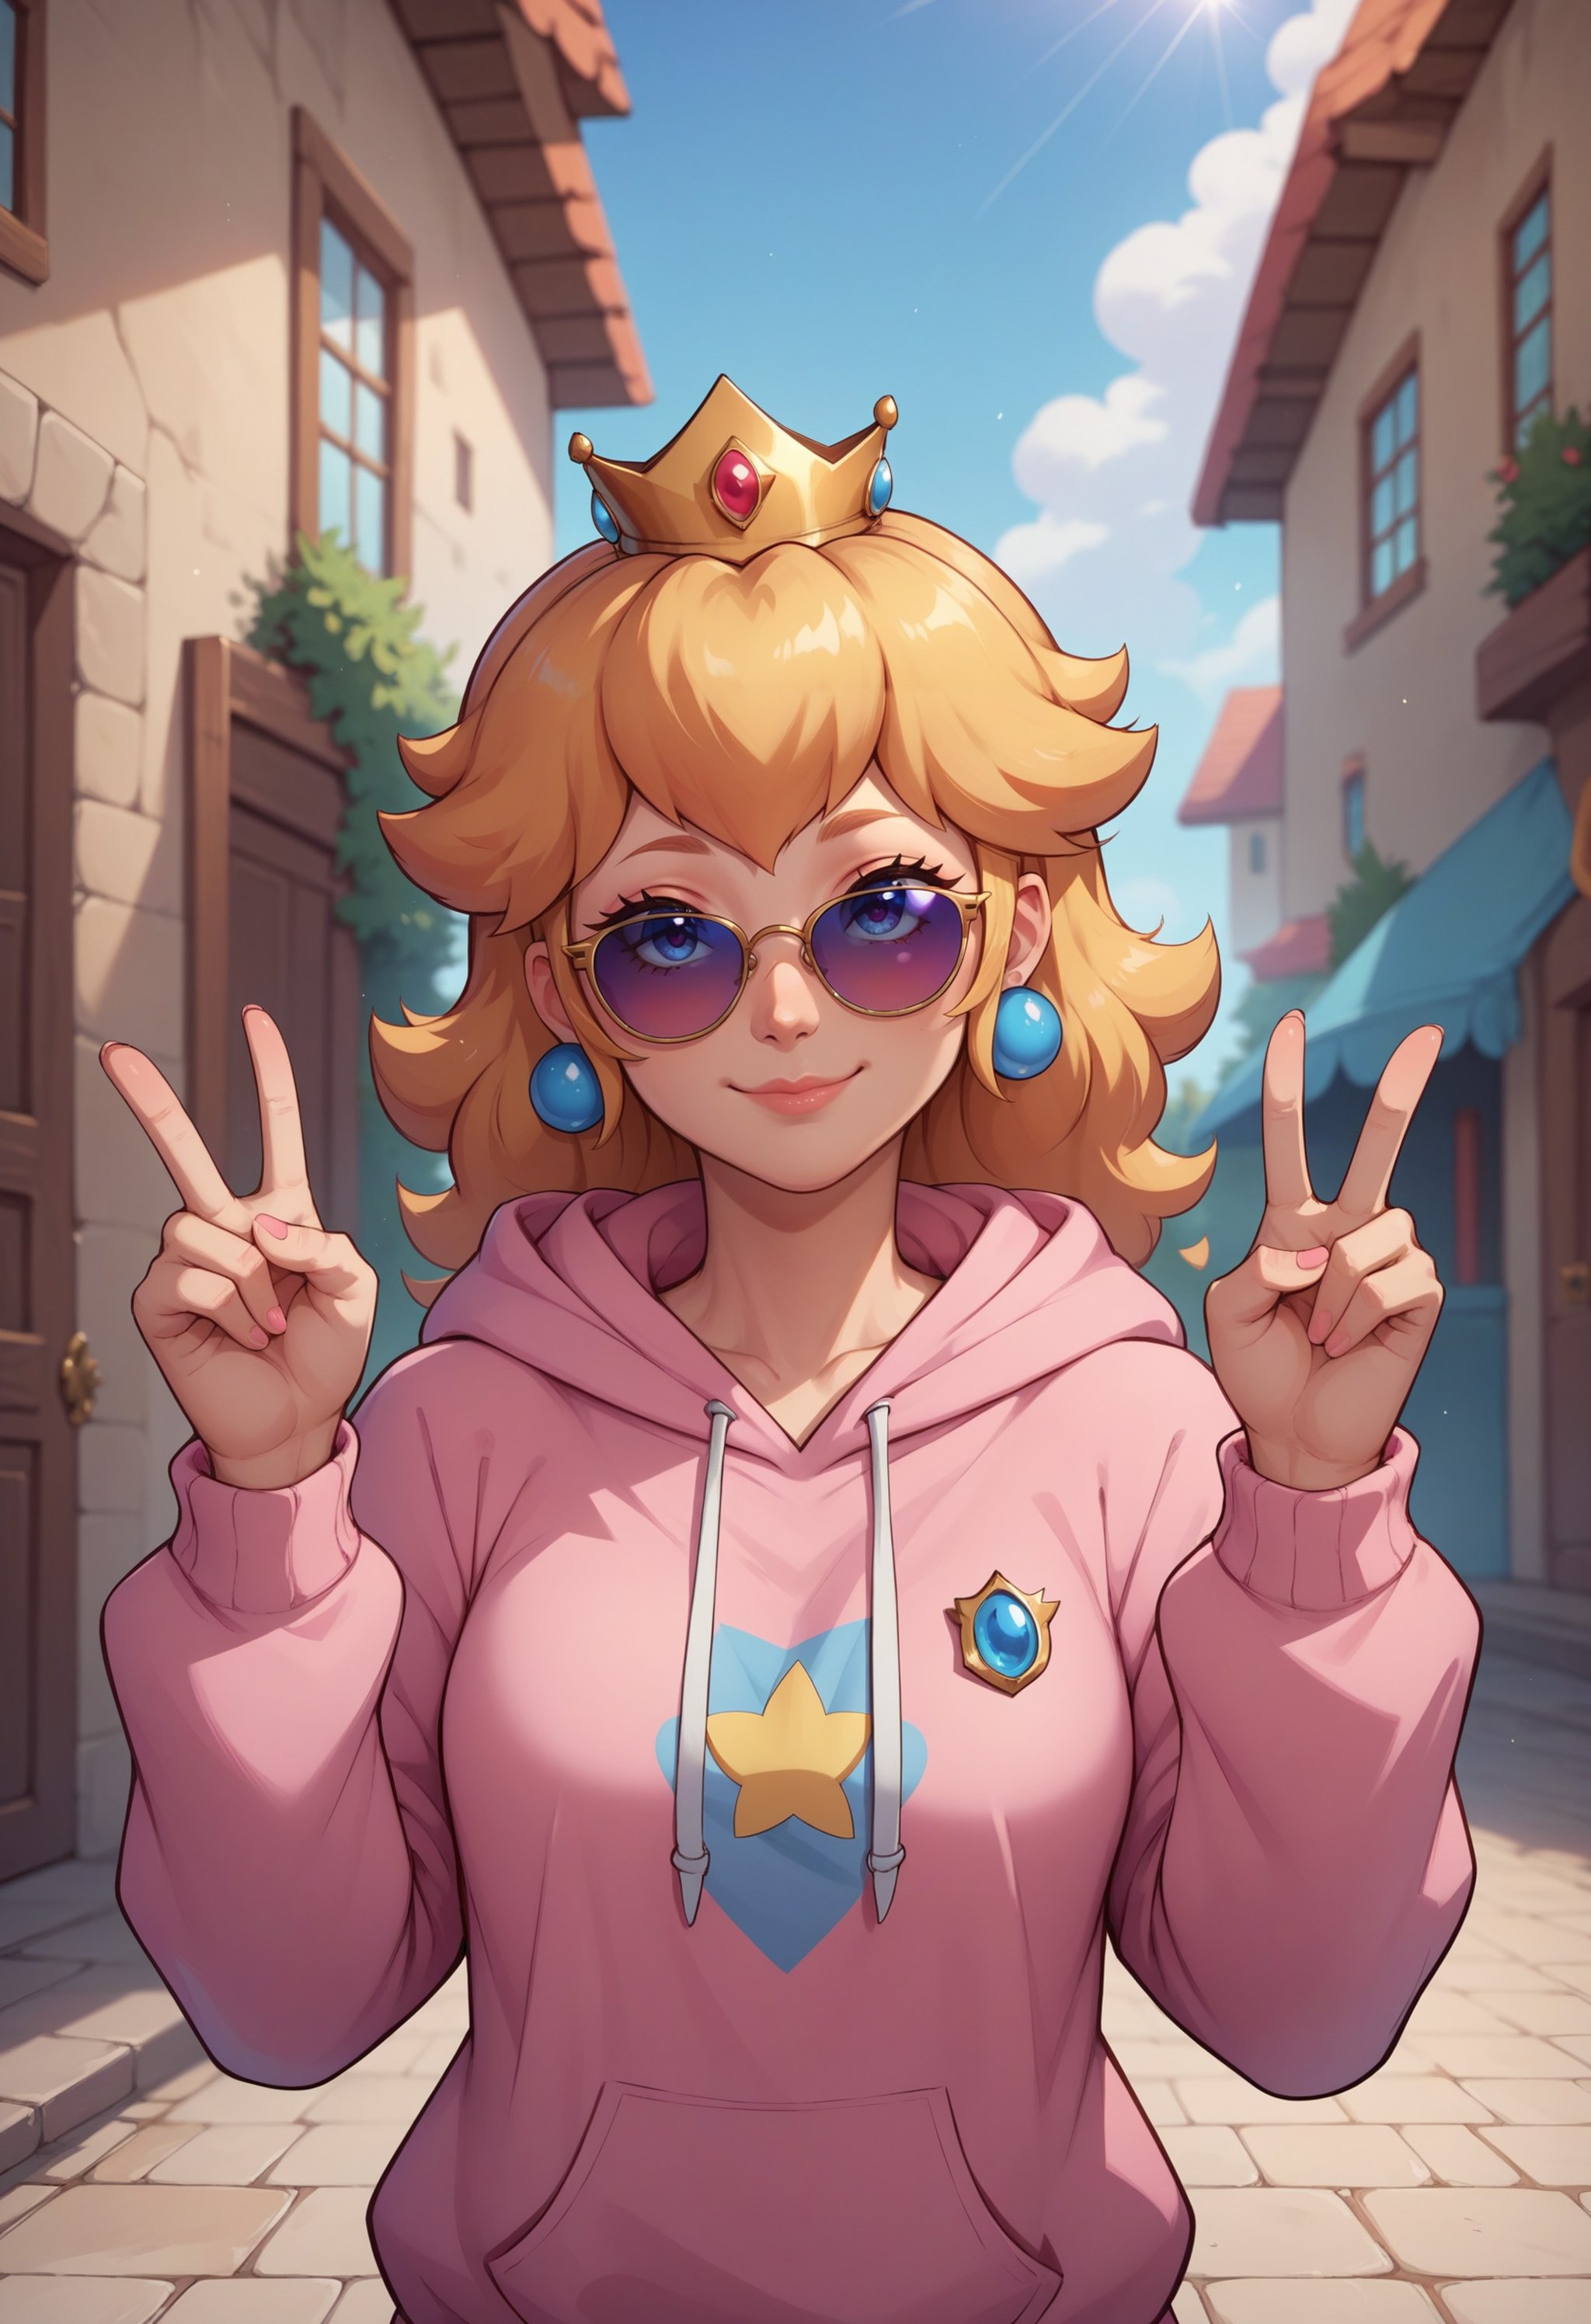 score_9, score_8_up, score_7_up, score_6_up, BREAK princess peach,hoodie,crown,sunglasses,smile,double v  <lora:mfcgXL:0.8>